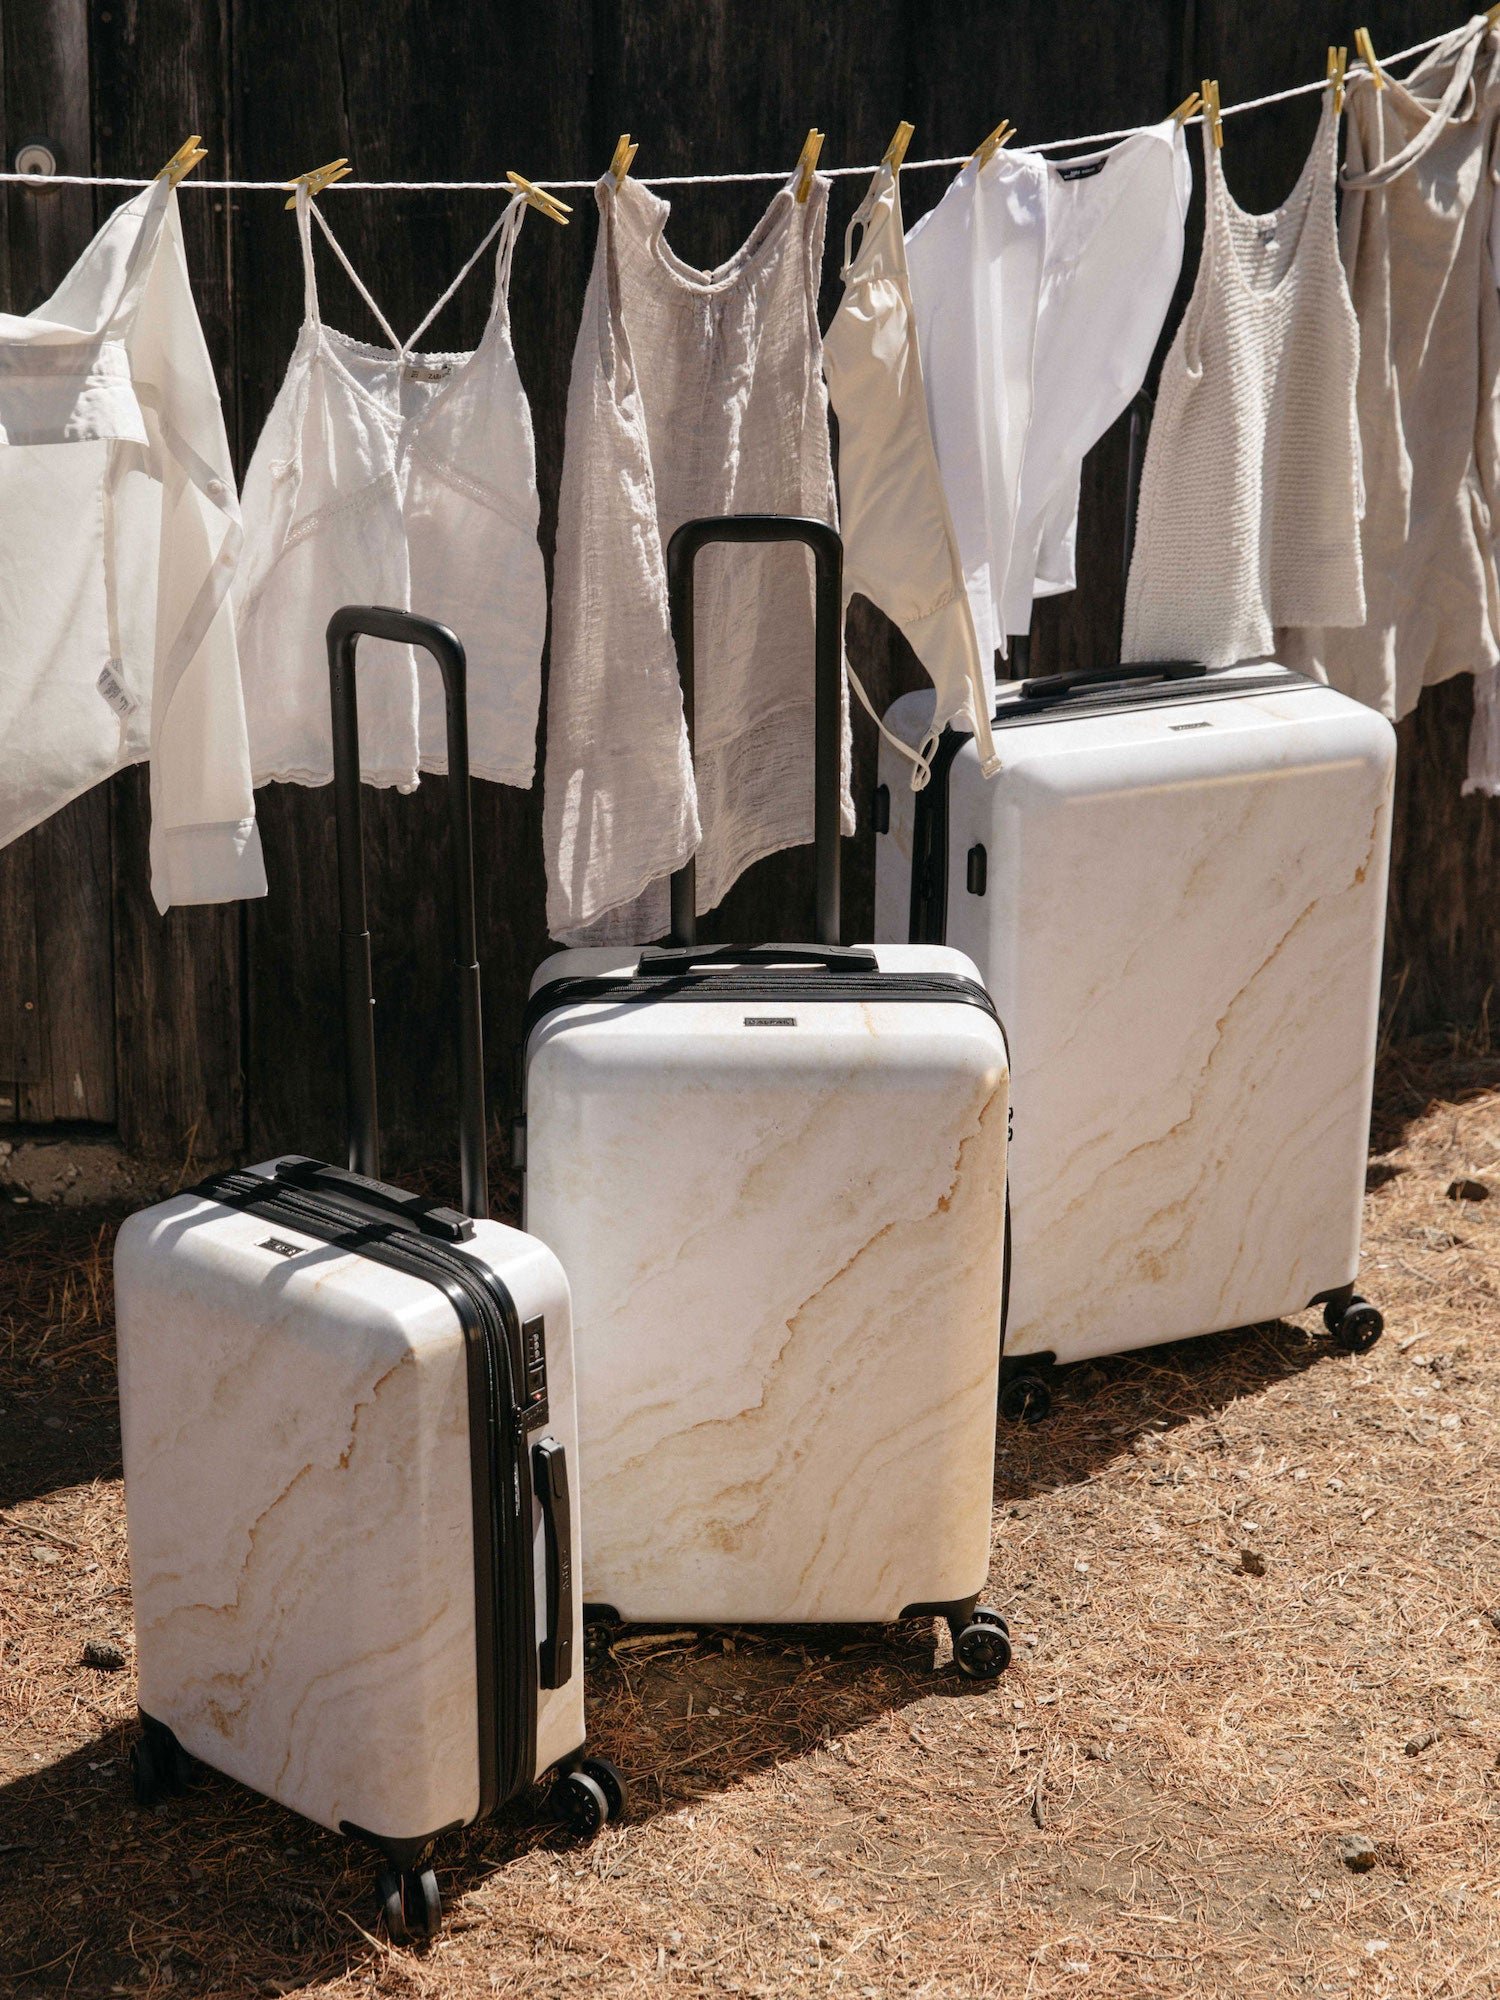 Gold Marble 3-Piece Luggage Set